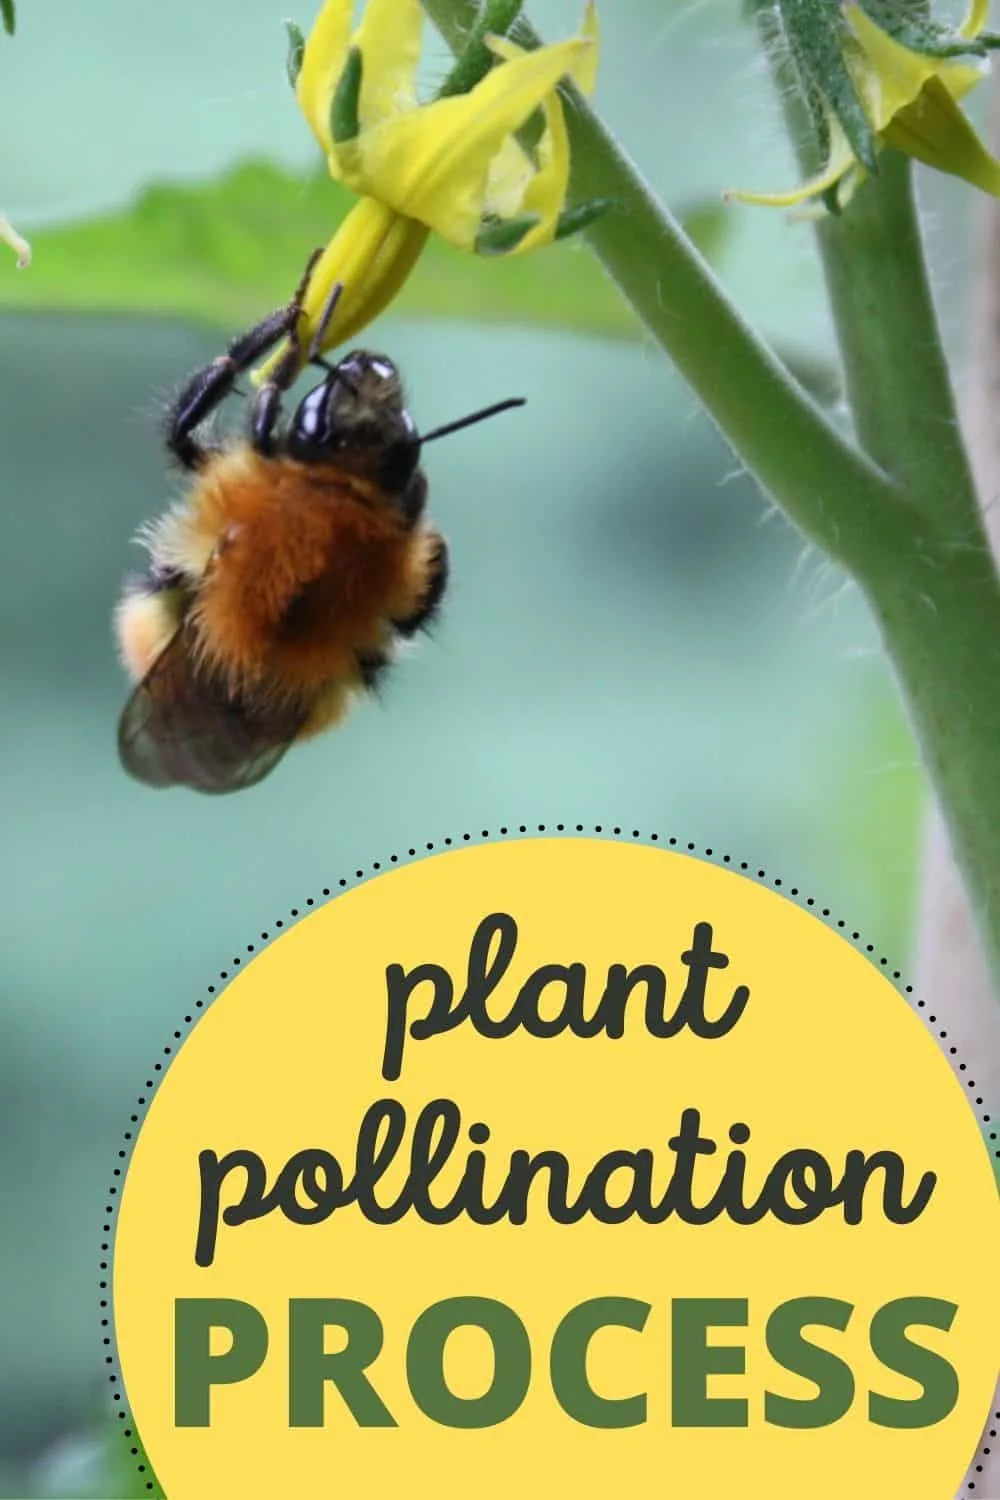 Plant pollination process in the hydroponic garden